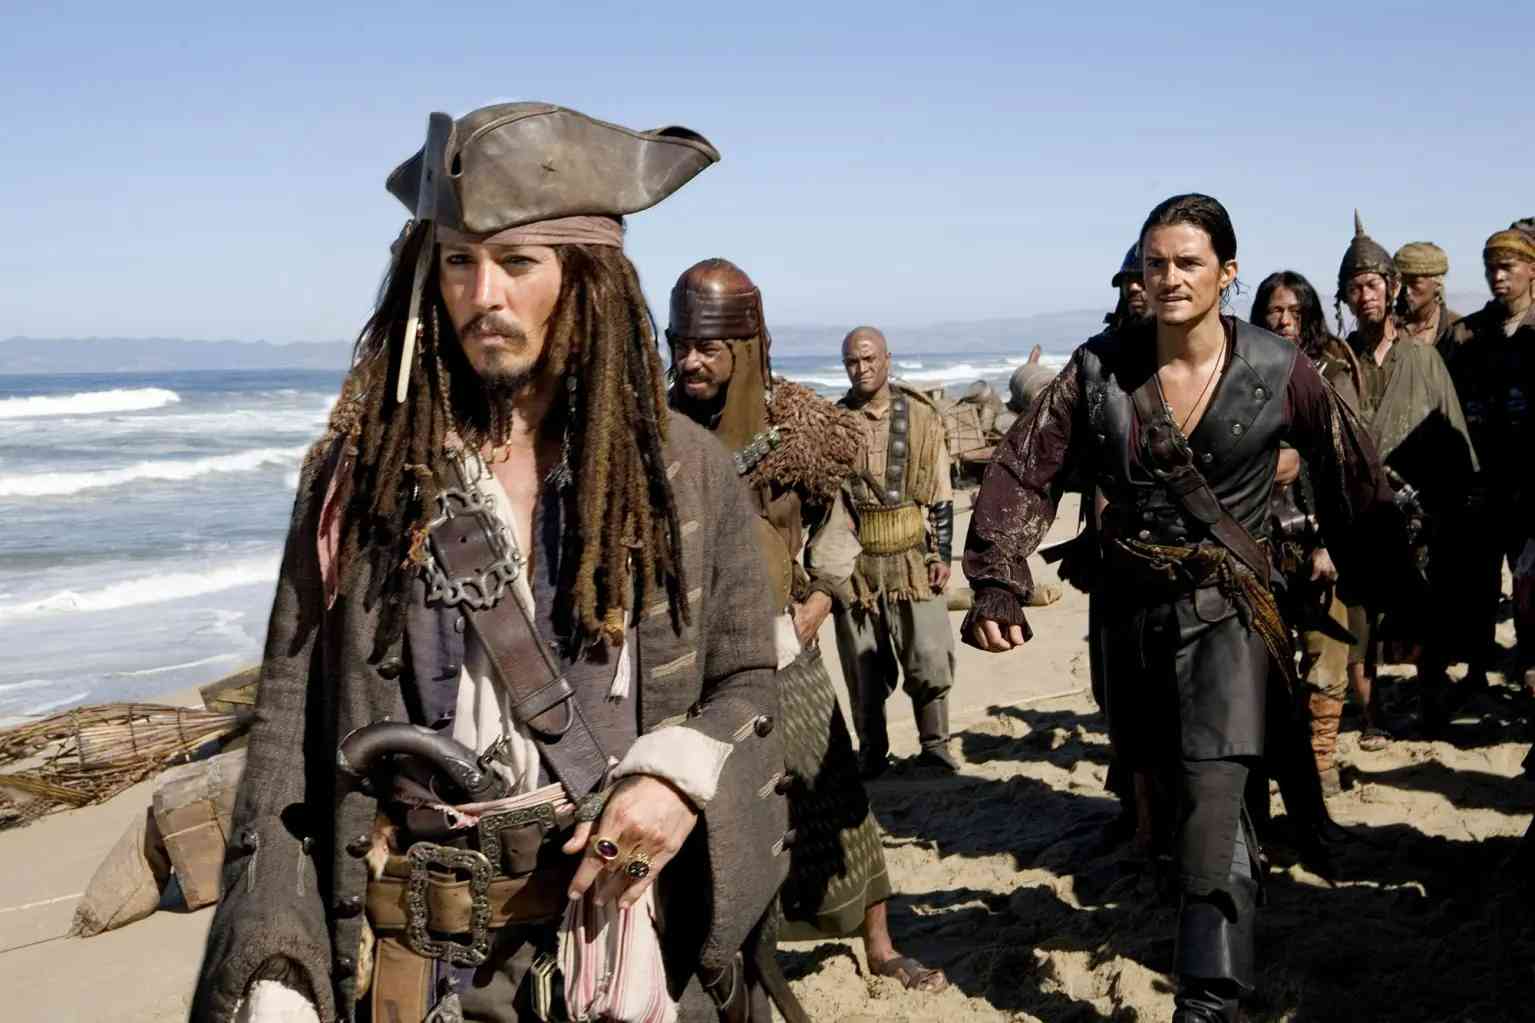 Pirates-of-the-Caribbean:-At-World's-End-in-France